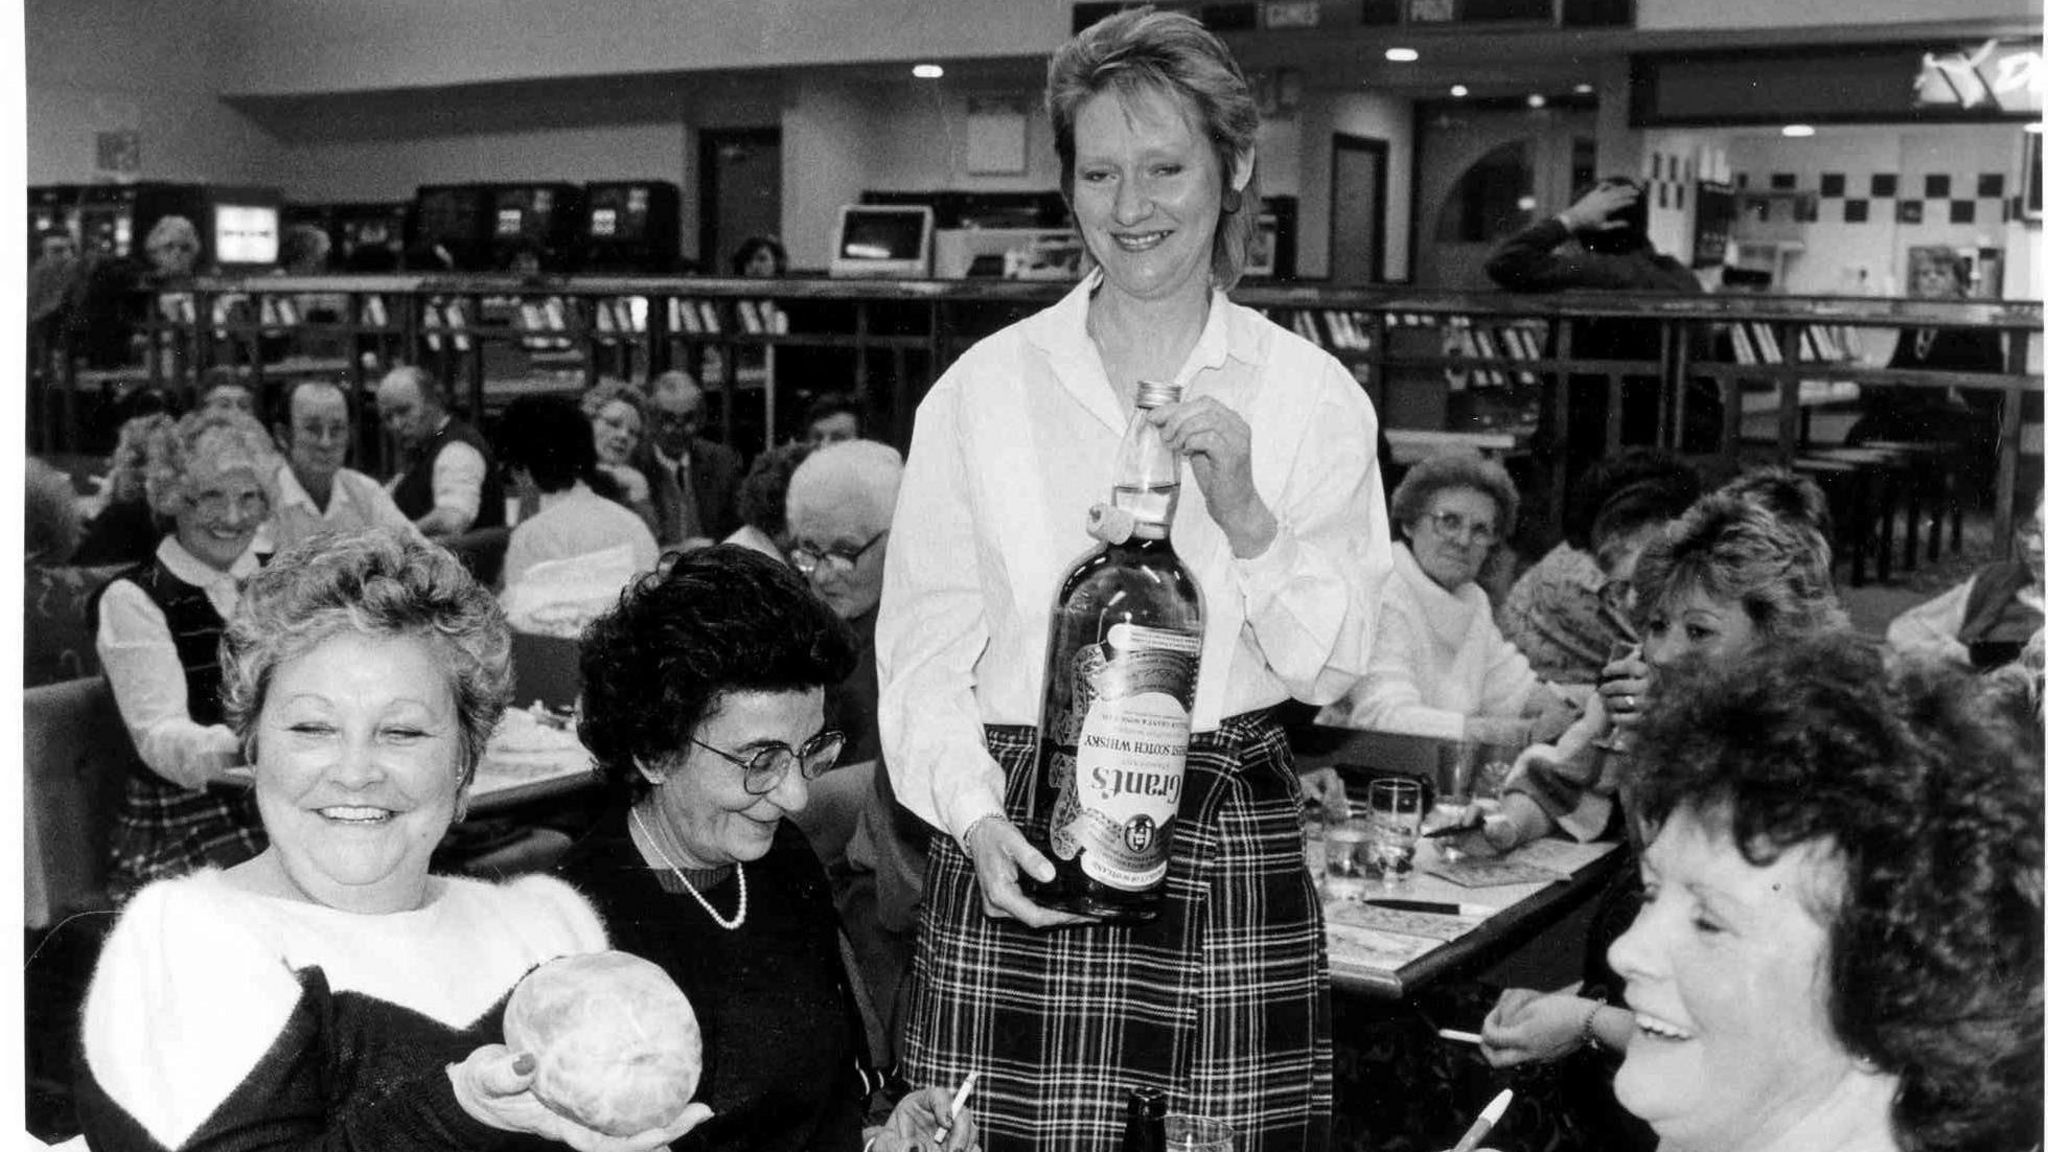 A lady holding a large bottle of whisky presenting it to two seated ladies in the bingo hall, everybody is smiling and laughing